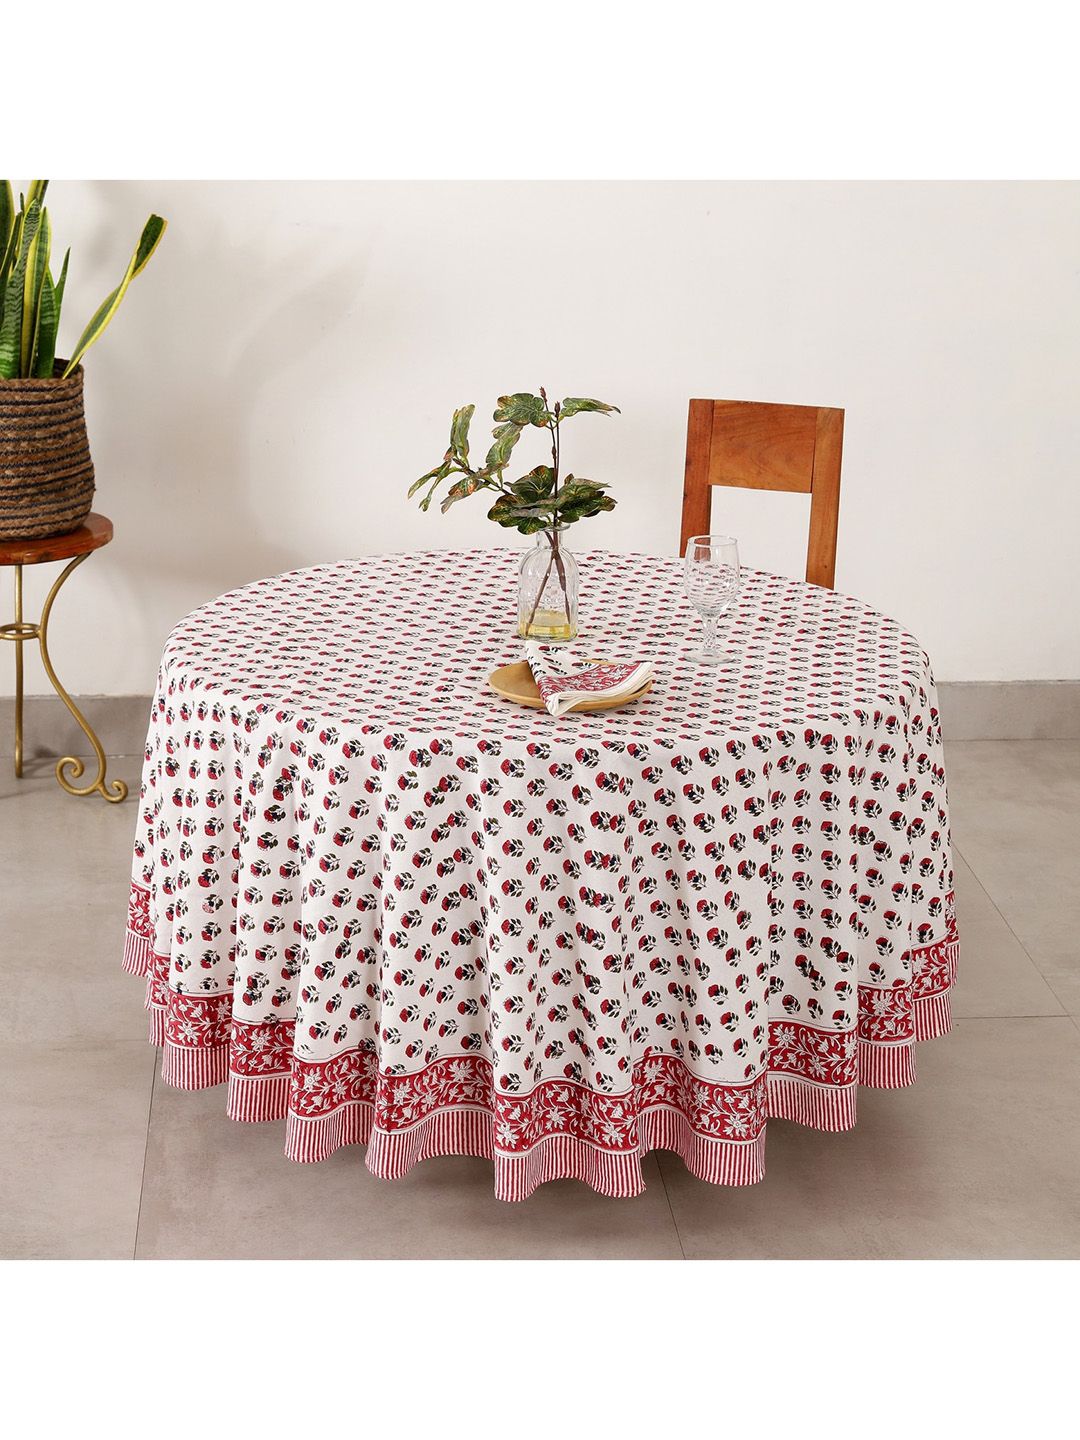 HANDICRAFT PALACE Red & White Floral Printed 4 Seater Round Cotton Dining Table Cover Price in India